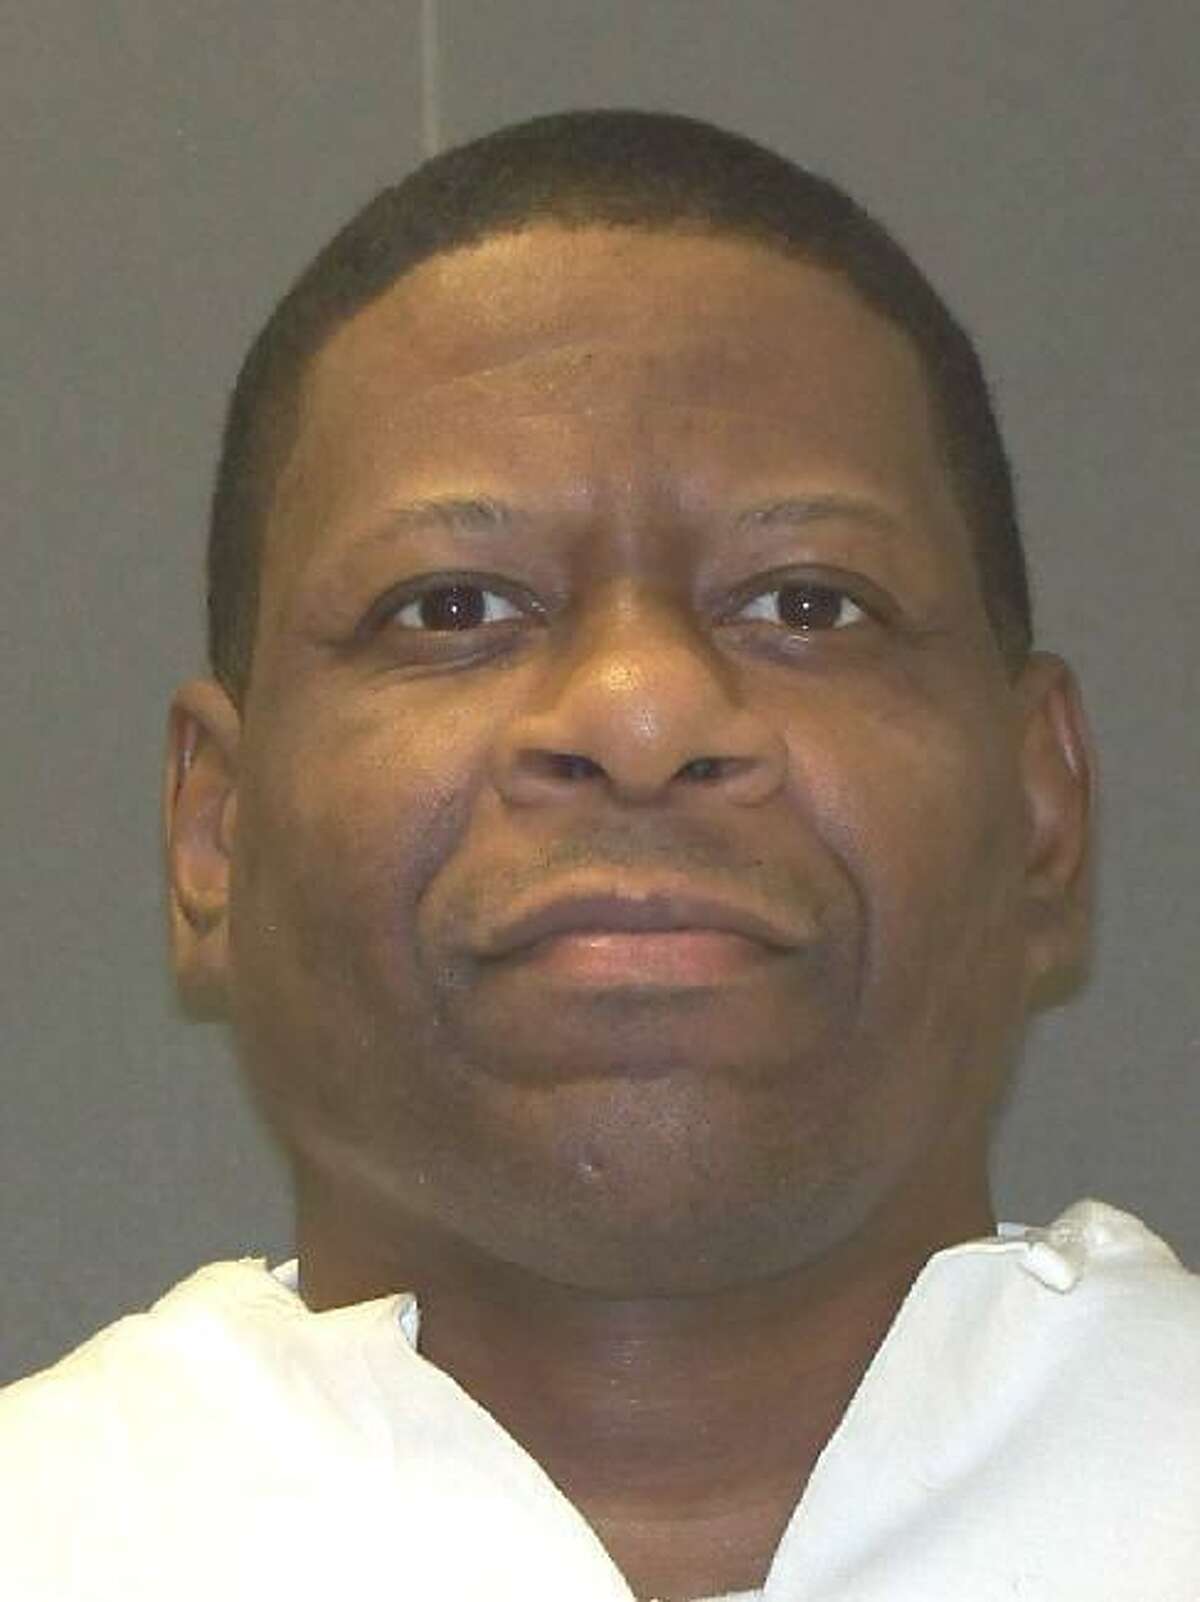 Texas death row inmate Rodney Reed has been set to die by lethal injection on Nov. 20, 2019. He has maintained his innocence in the April 1996 abduction, rape and strangling of 19-year-old Stacy Stites, whose body was found off the side of a road in Bastrop County.